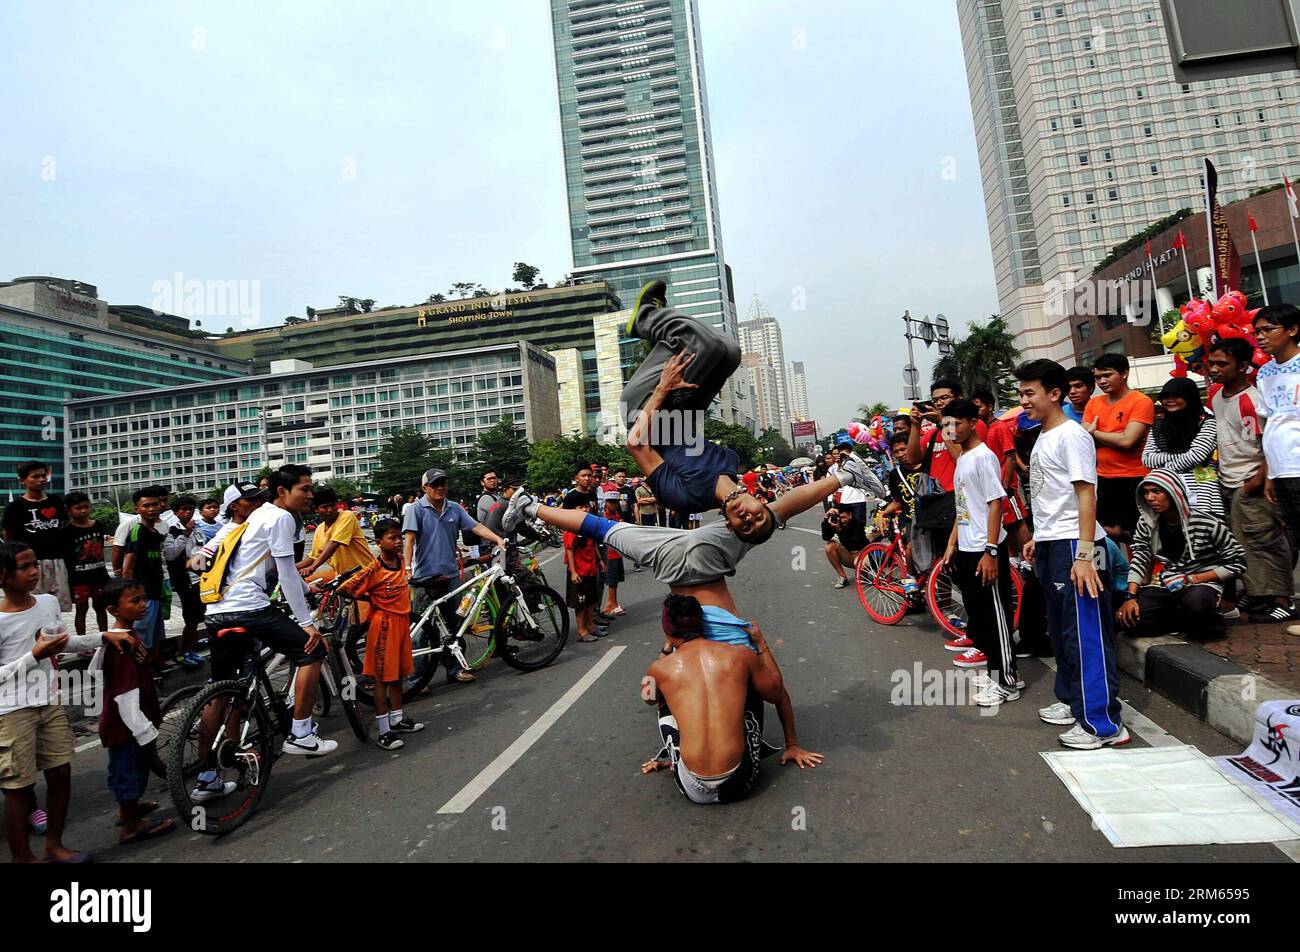 Bildnummer: 60806605  Datum: 08.12.2013  Copyright: imago/Xinhua     A man from Indonesian Jumper community stages some parkour and free run skills during the car free day in Jakarta, Indonesia, Dec. 8, 2013. (Xinhua/Agung Kuncahya B.) INDONESIA-JAKARTA-CAR FREE DAY PUBLICATIONxNOTxINxCHN xcb x0x 2013 quer Stock Photo